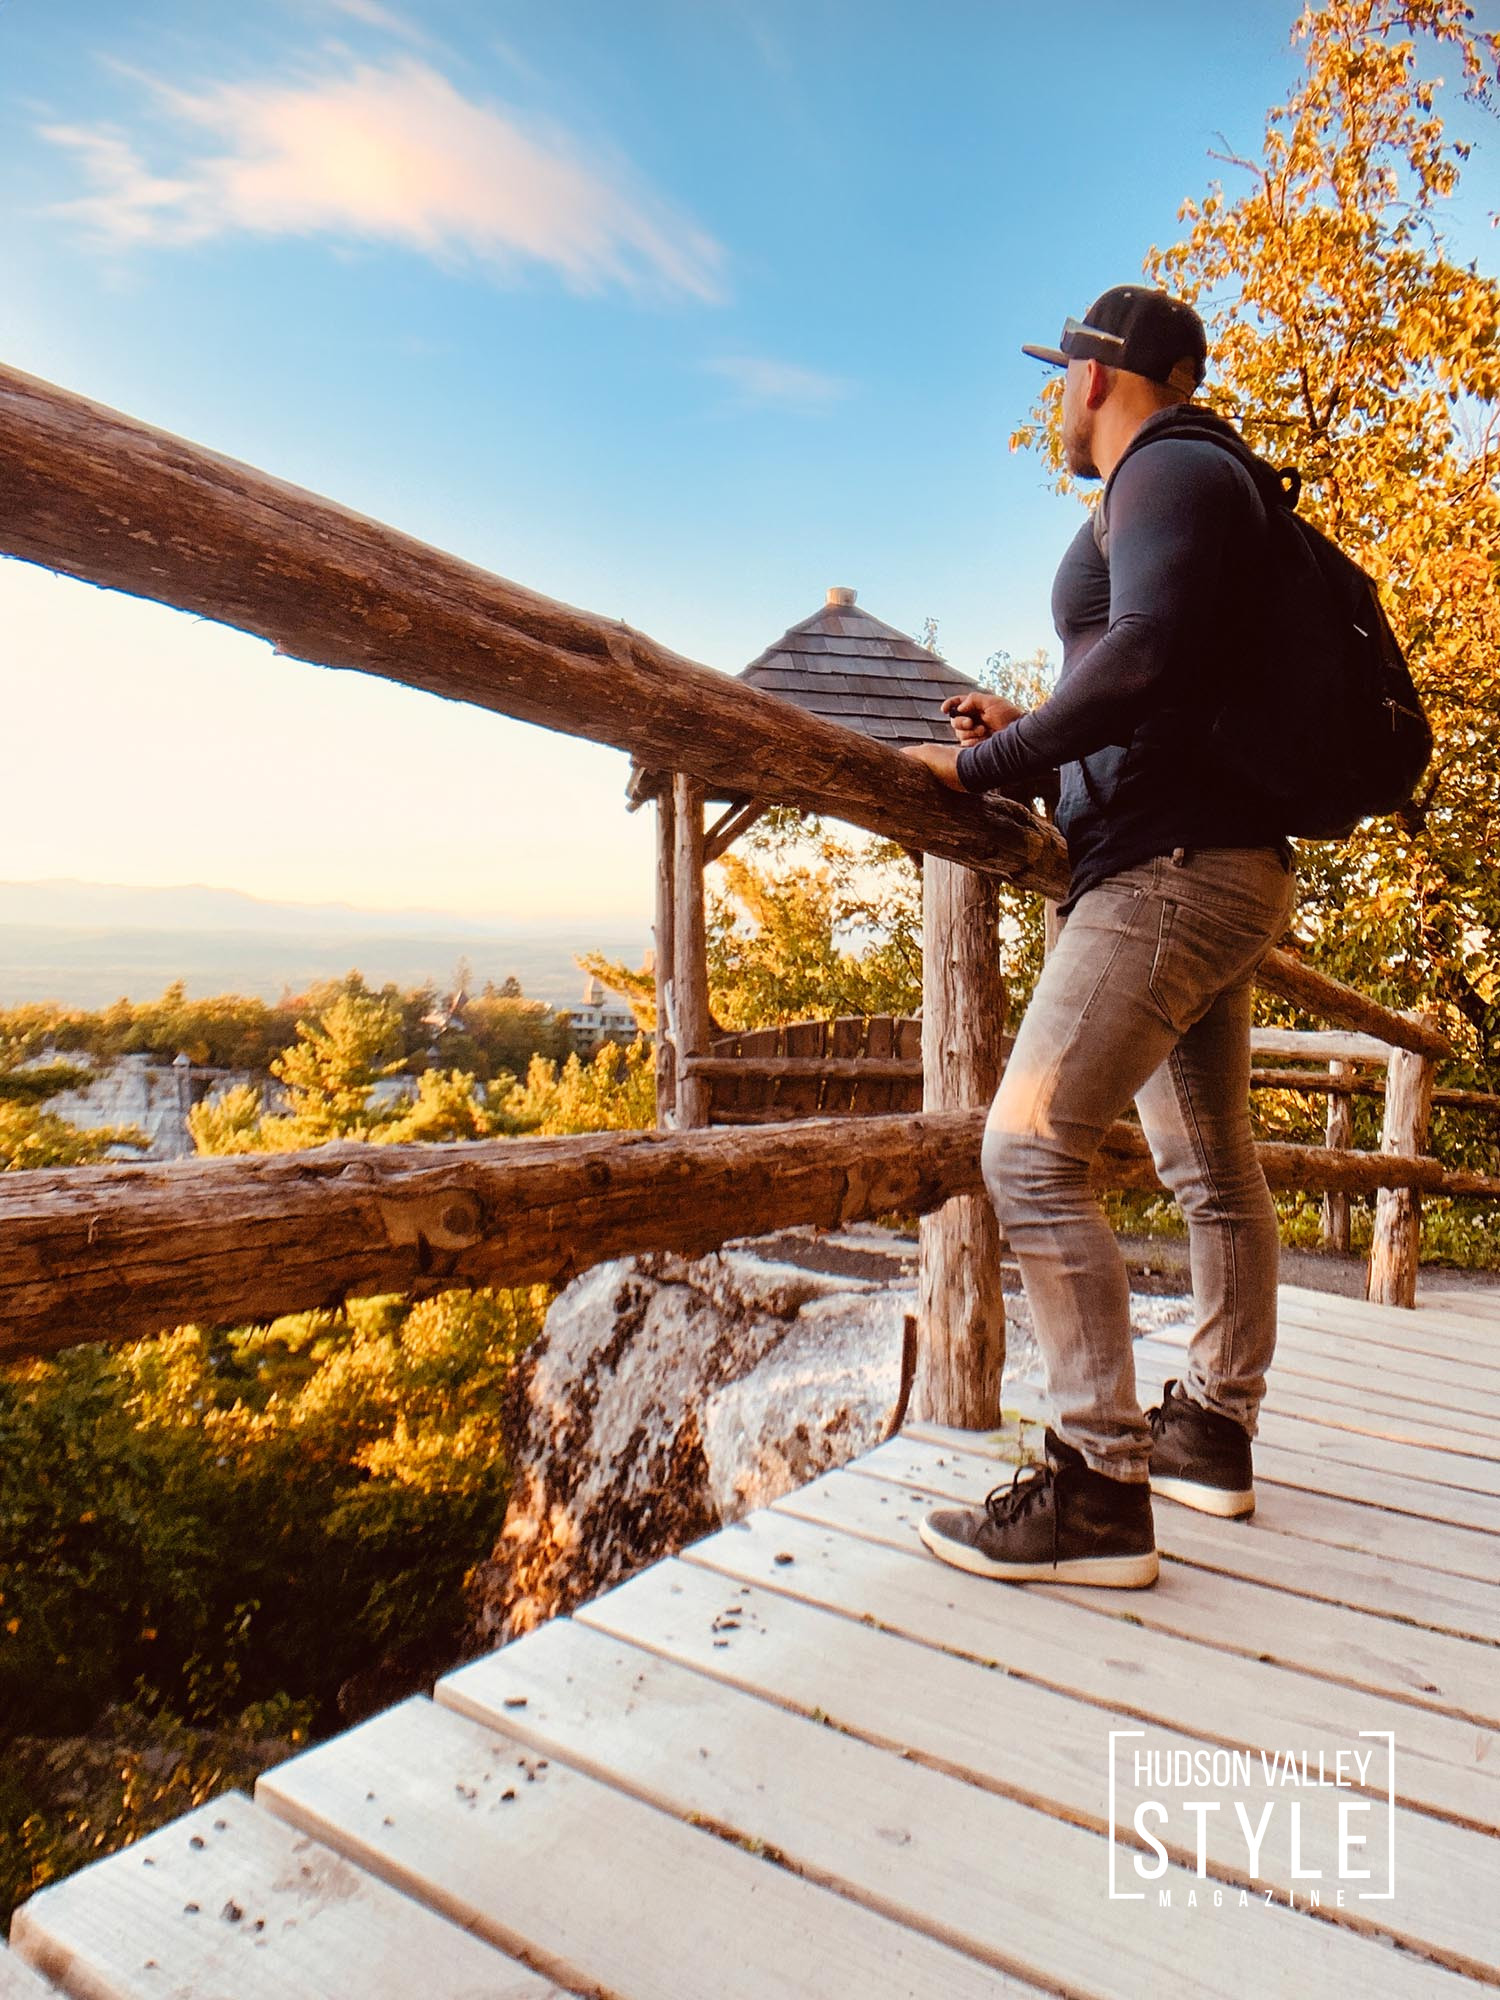 Embracing Nature's Splendor: Fall Hiking Adventures in the Hudson Valley's Mohonk Preserve – Wellness 101 with Maxwell Alexander